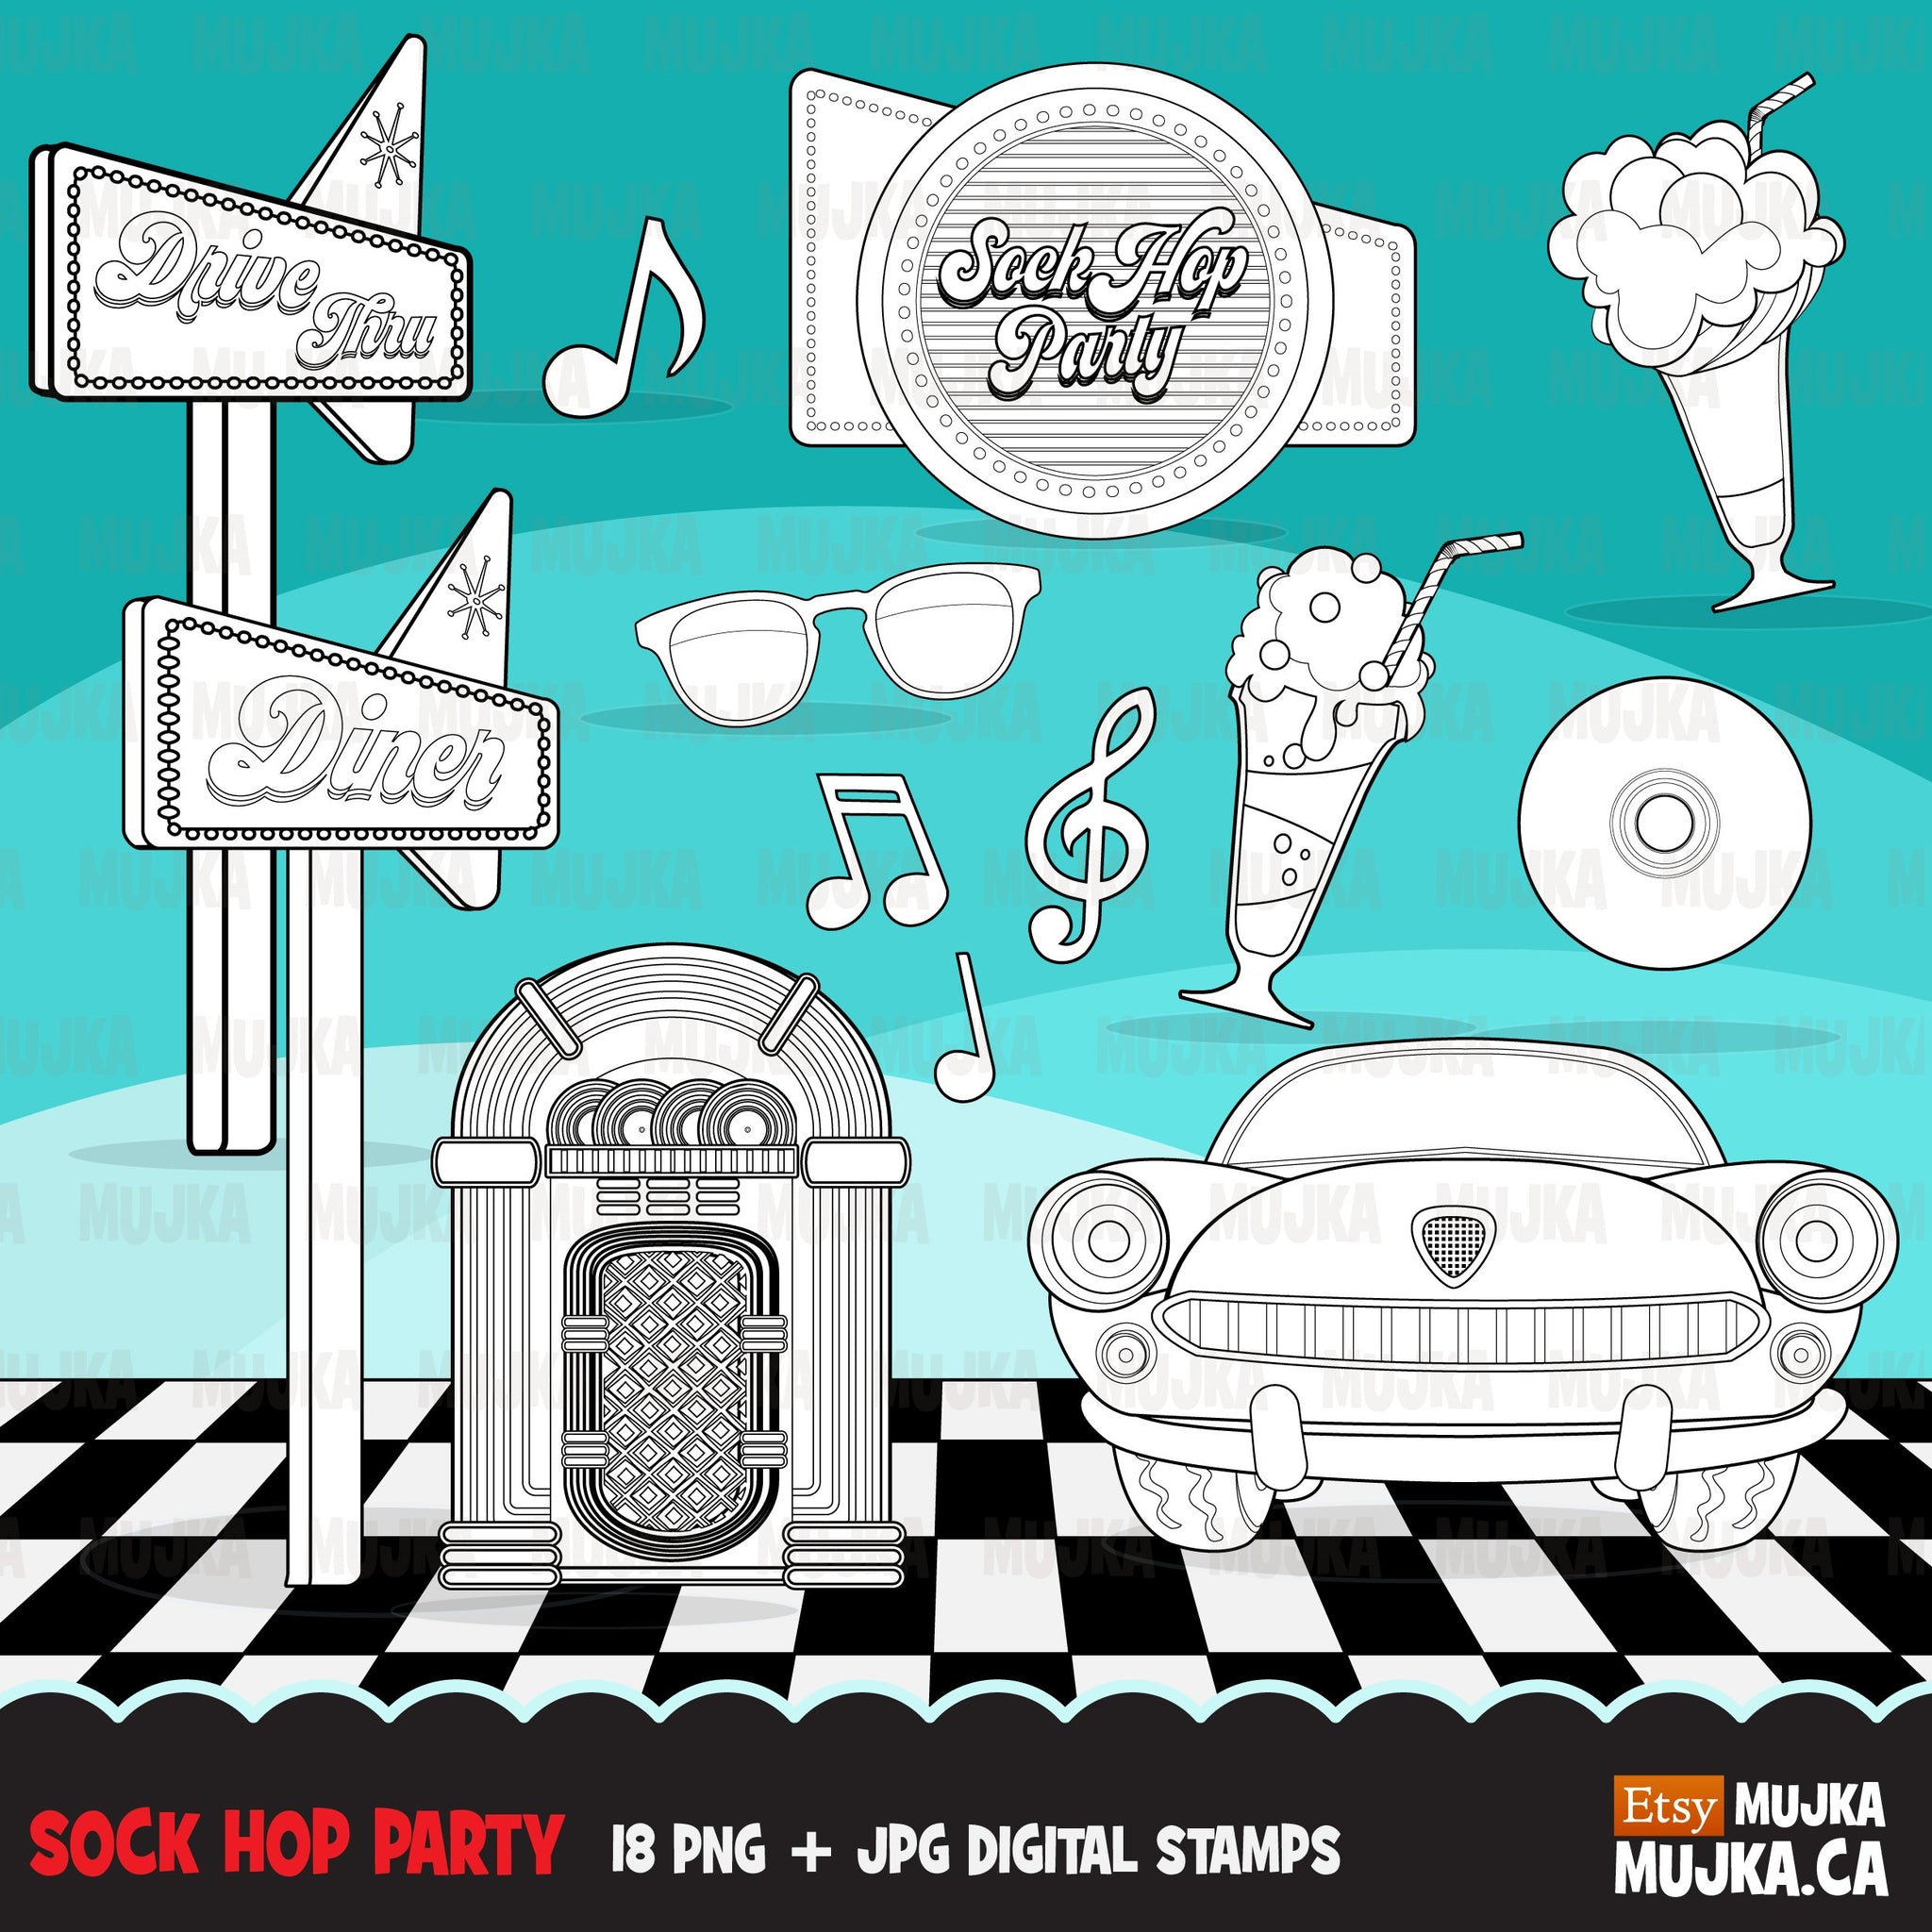 Sock Hop Clipart Bundle. Cute set of 50's diner and sock hop characters and cliparts, boy, girl, vintage